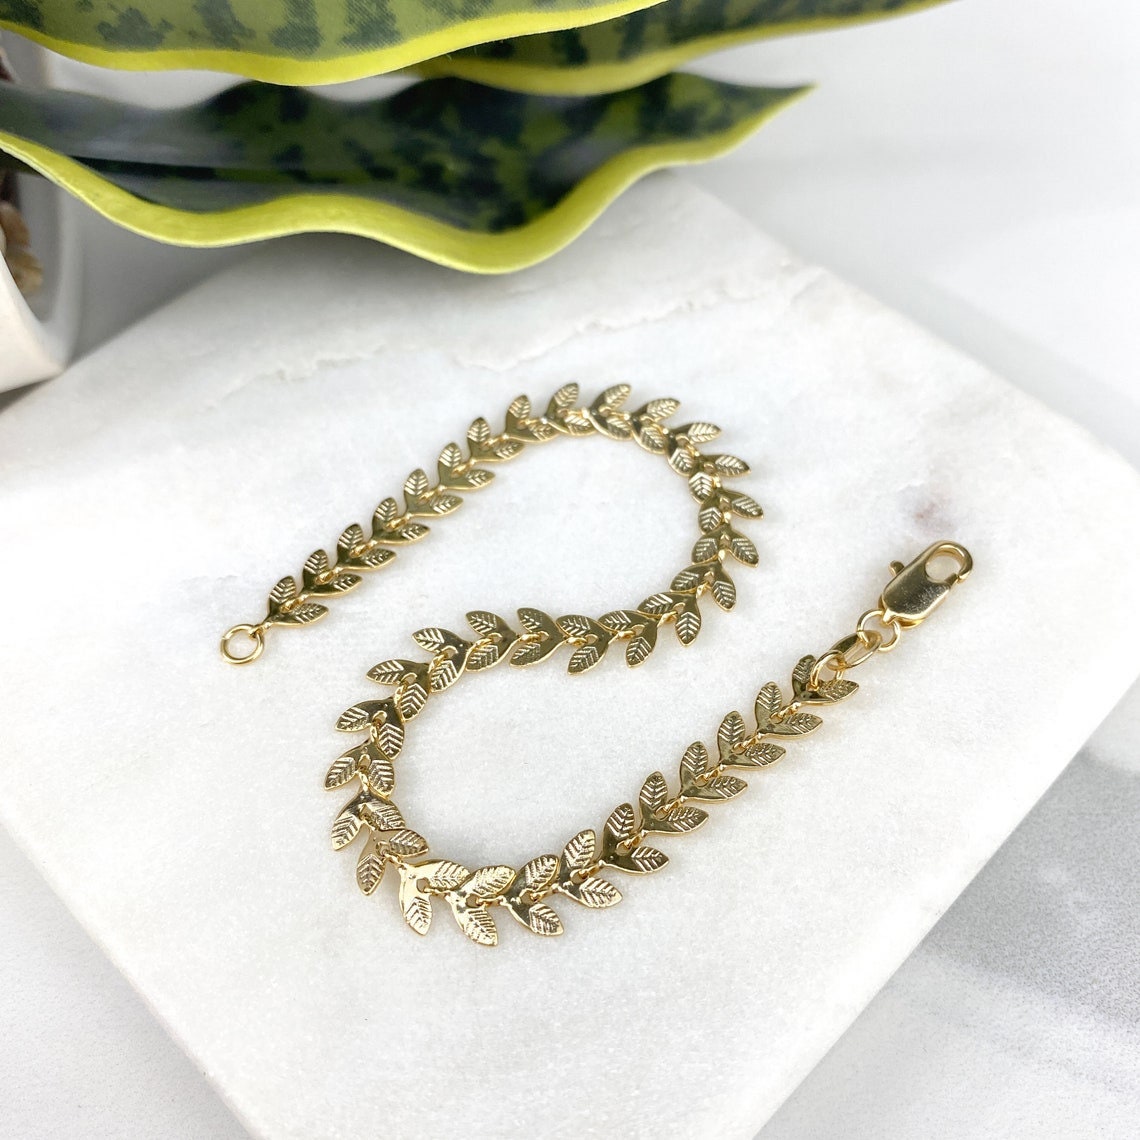 18k Gold Filled 6mm Leafs Chevron Link Chain Bracelet, Wholesale Jewelry Making Supplies